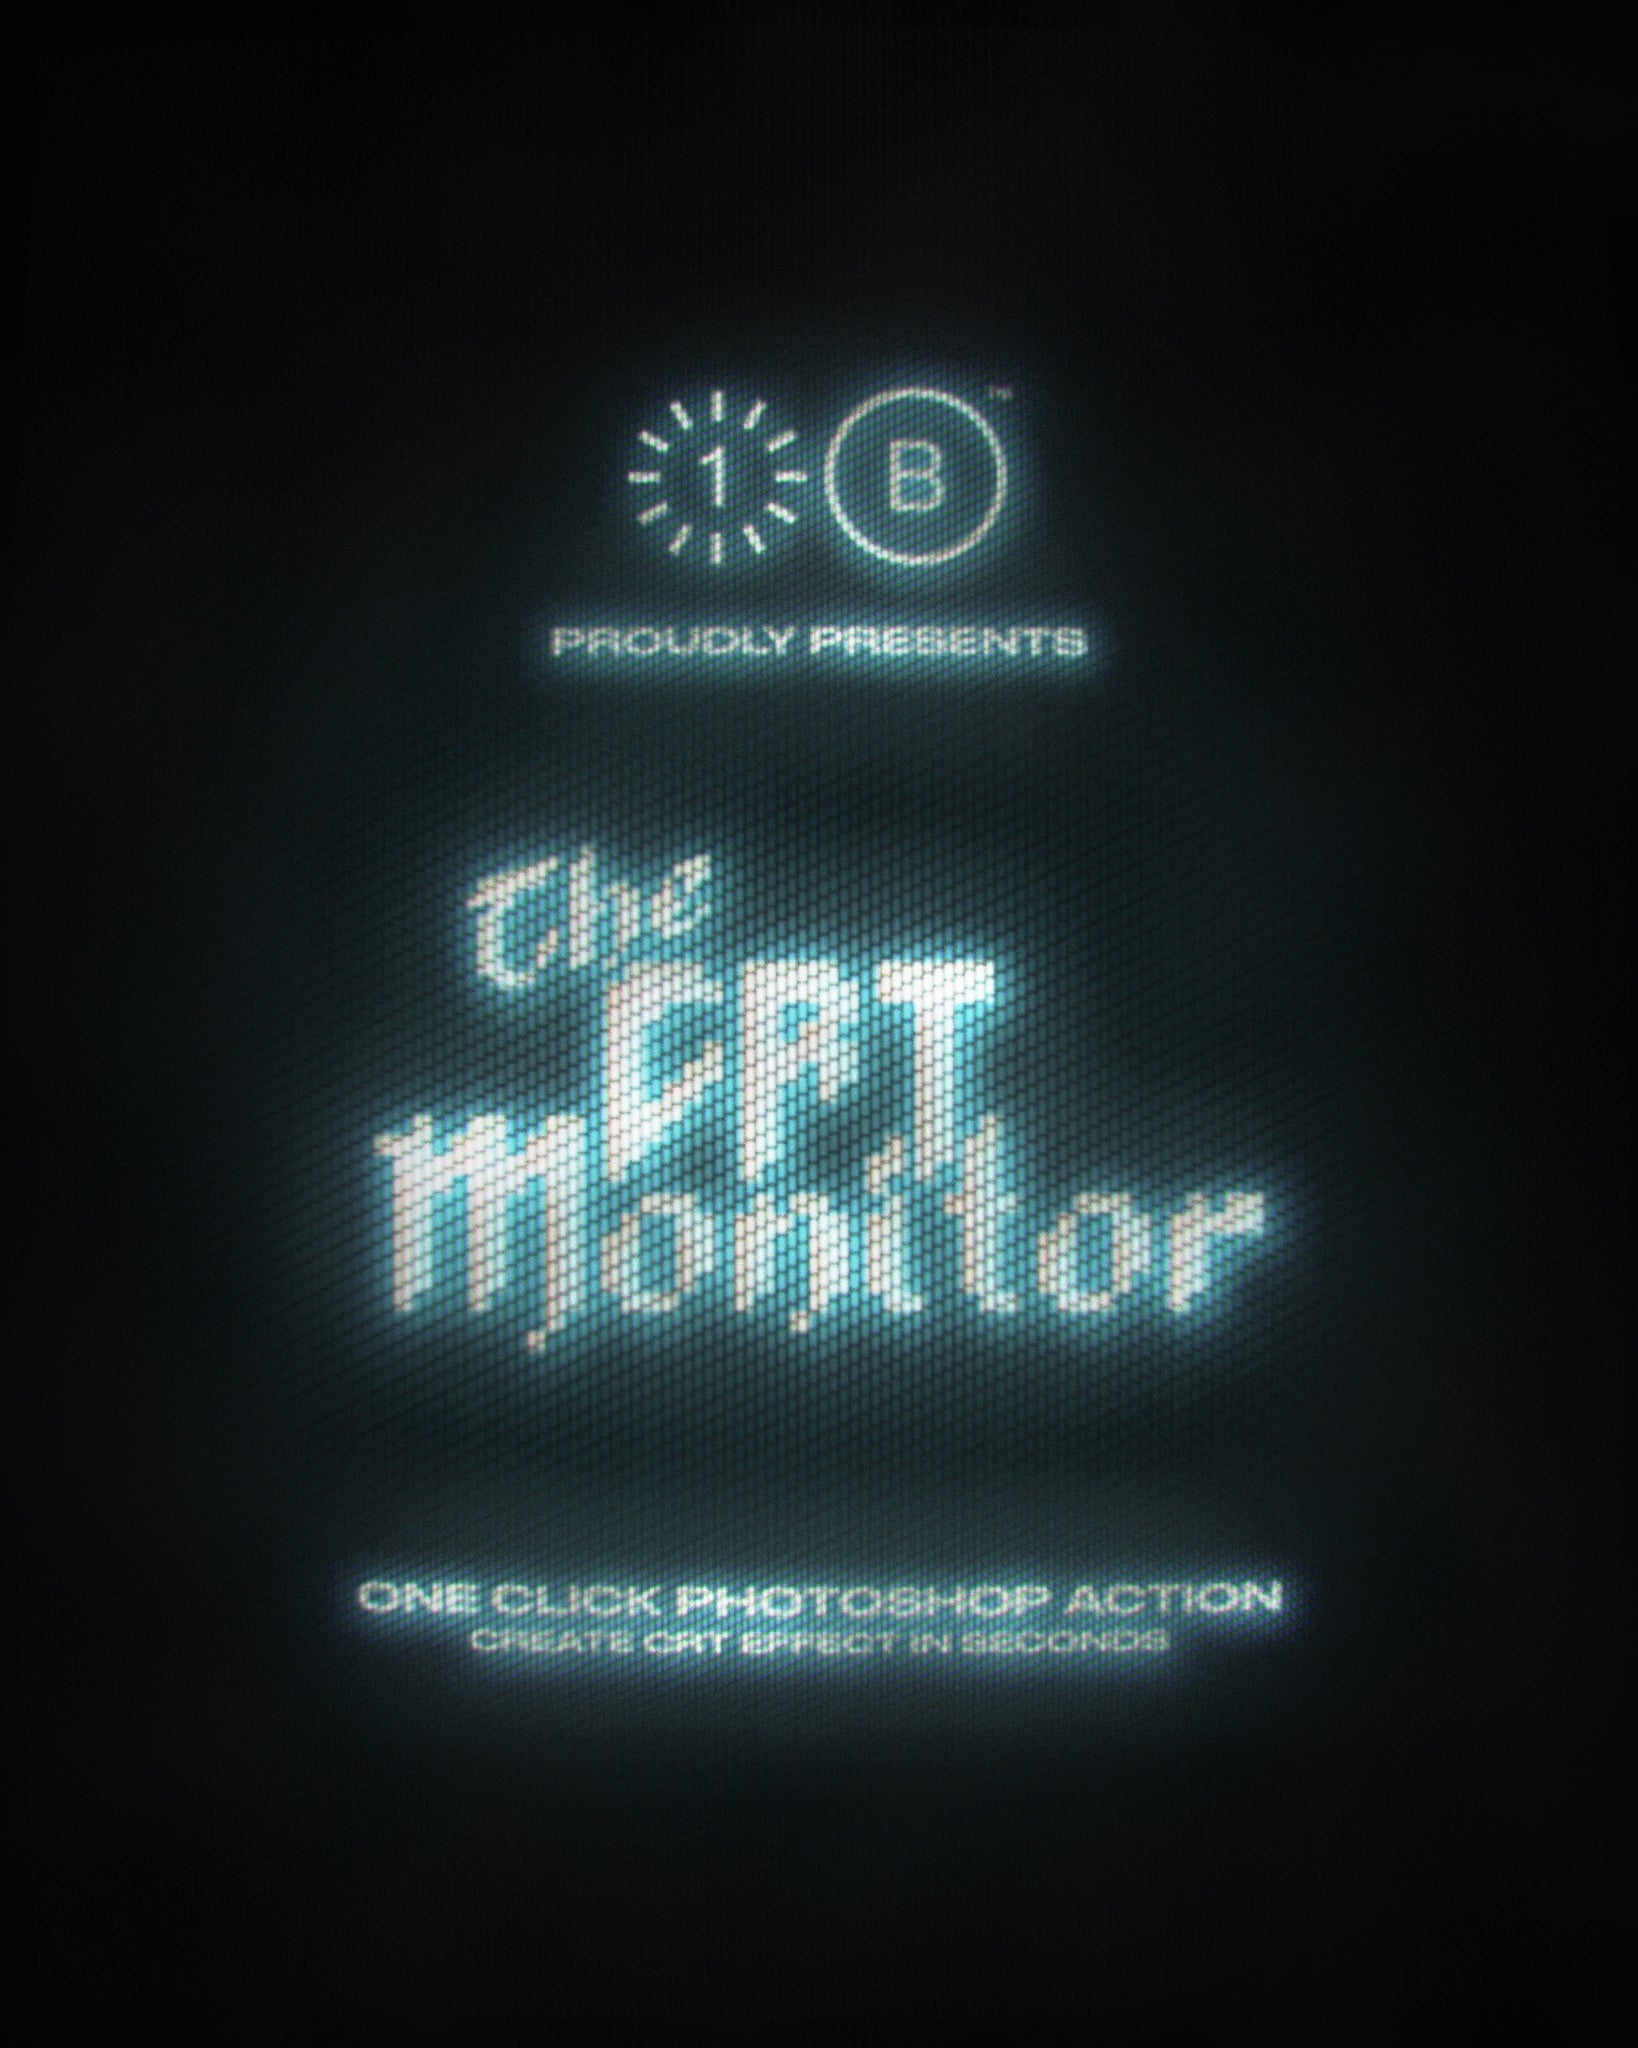 The CRT Monitor